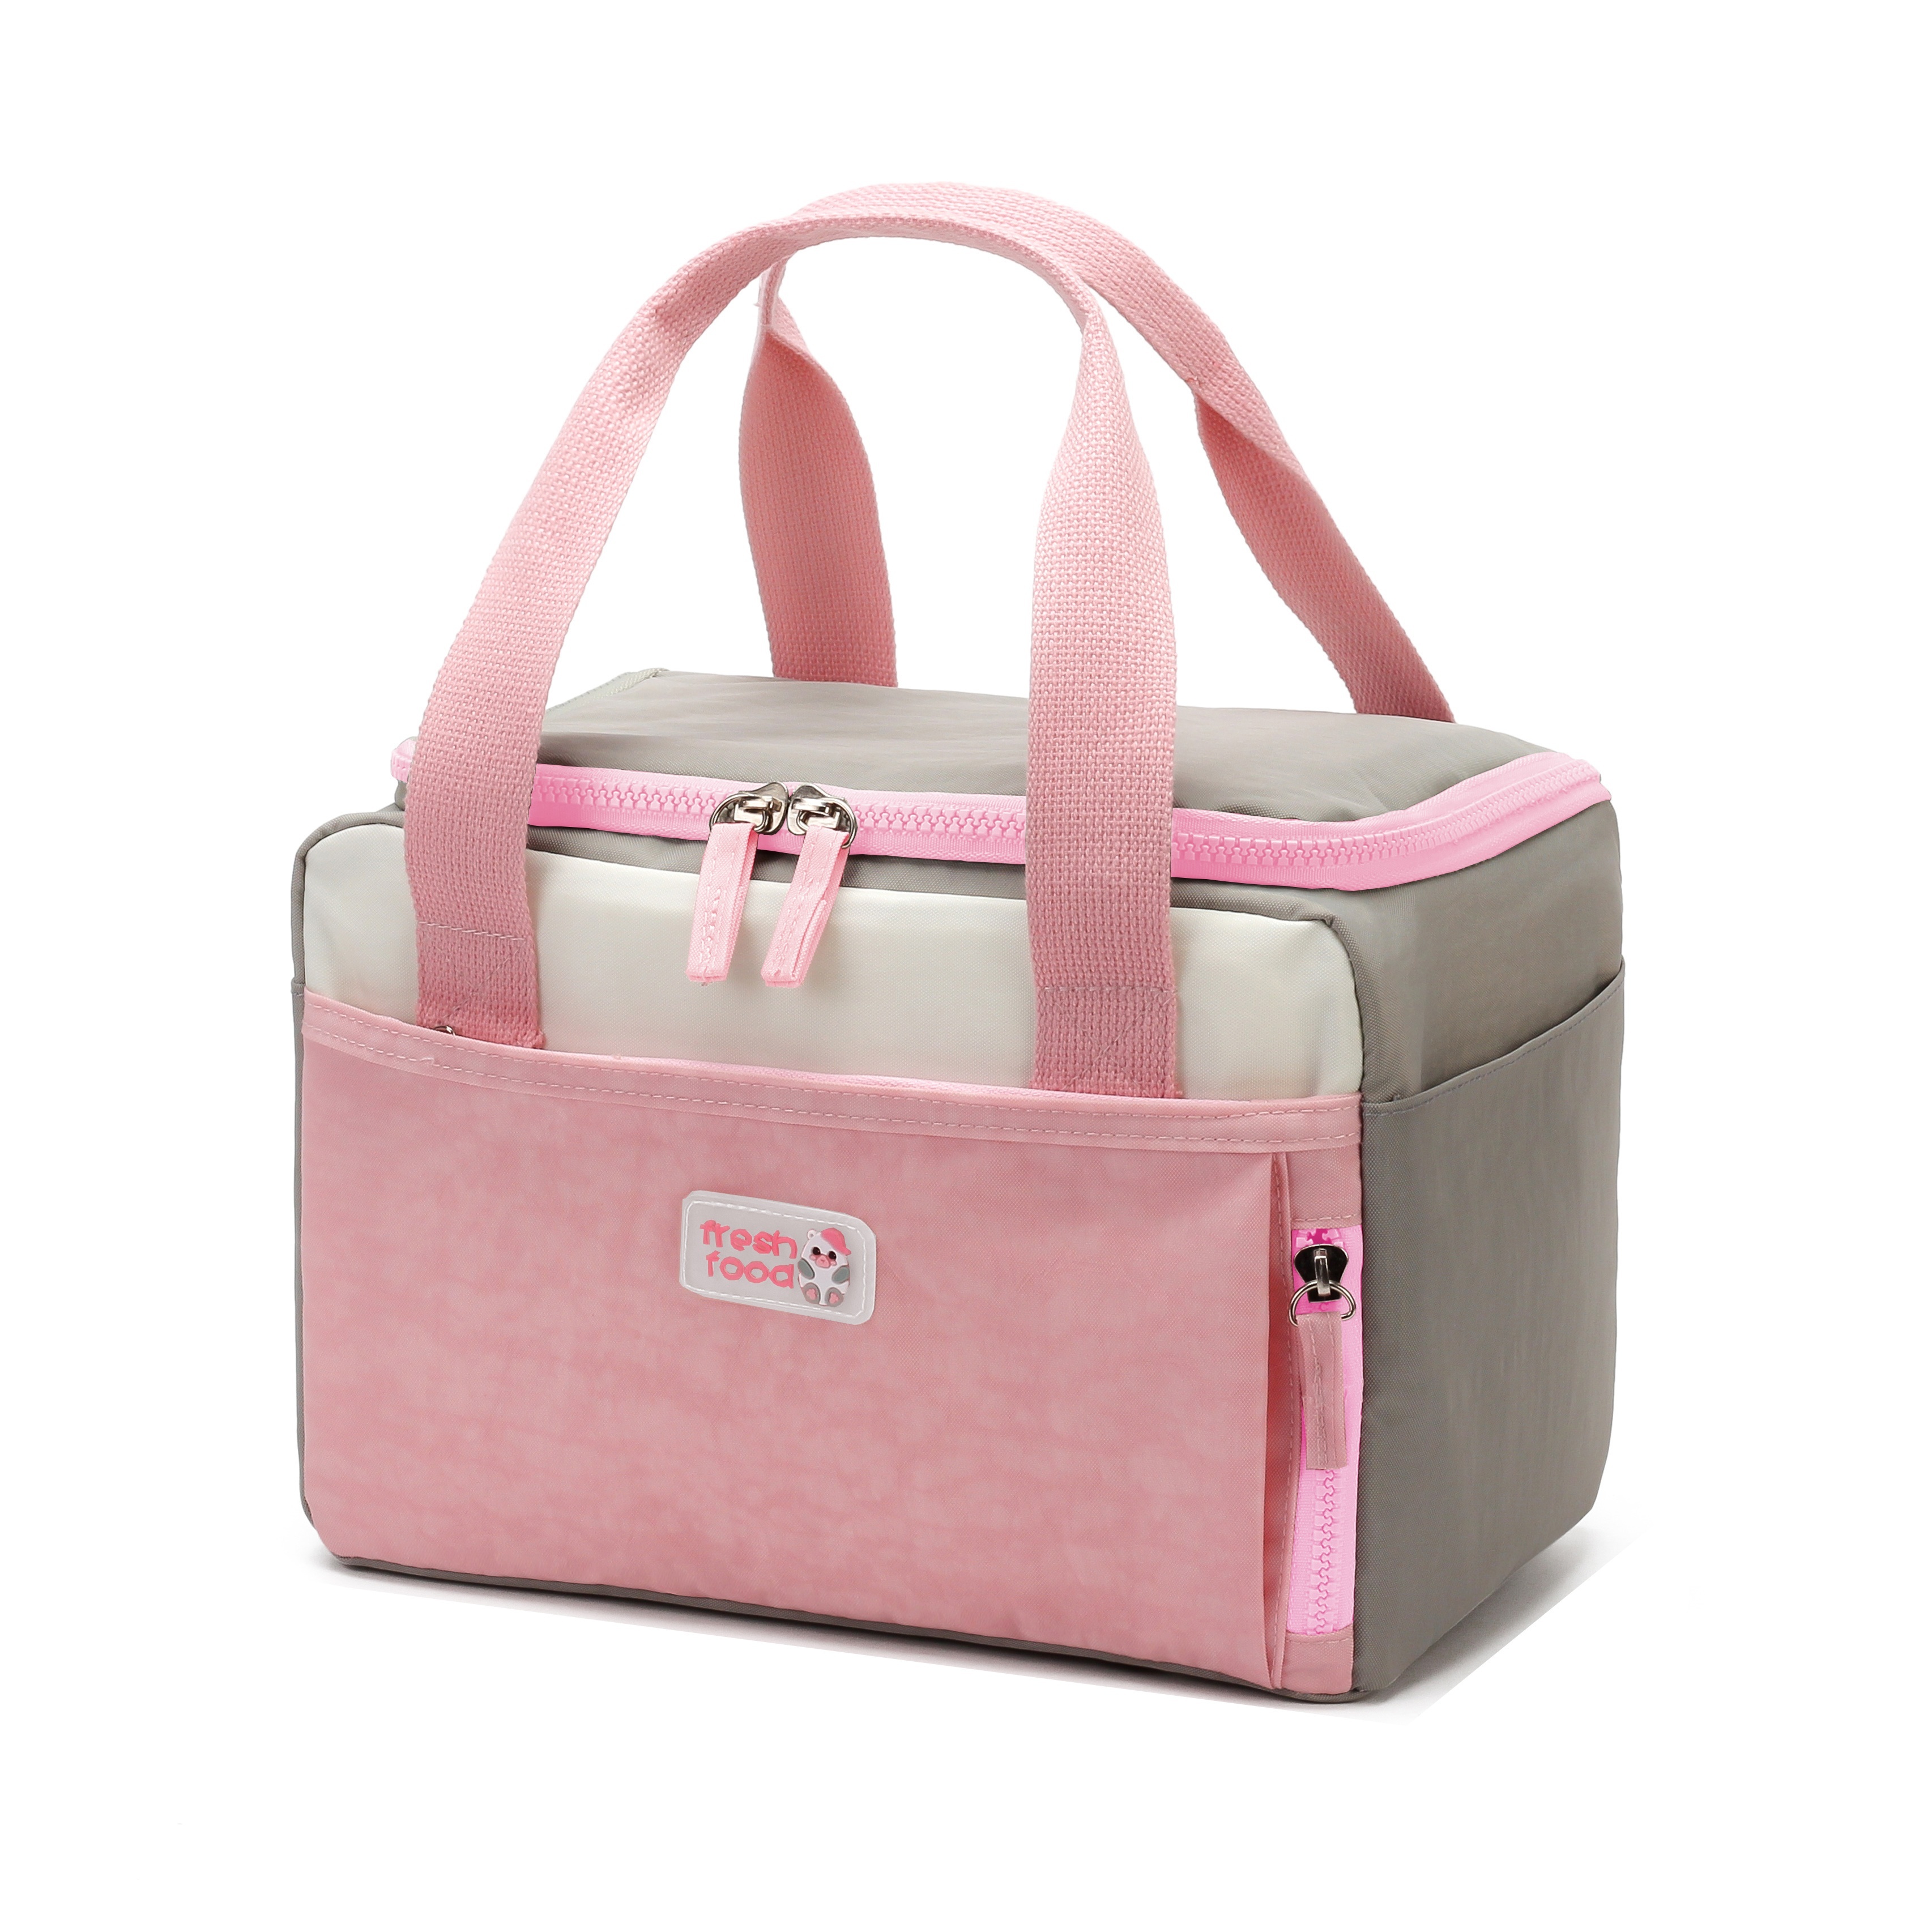 1pc Pink Lunch Bag, Modern Polyester Waterproof Reusable Lunch Bag For  Office Work School Picnic Beach